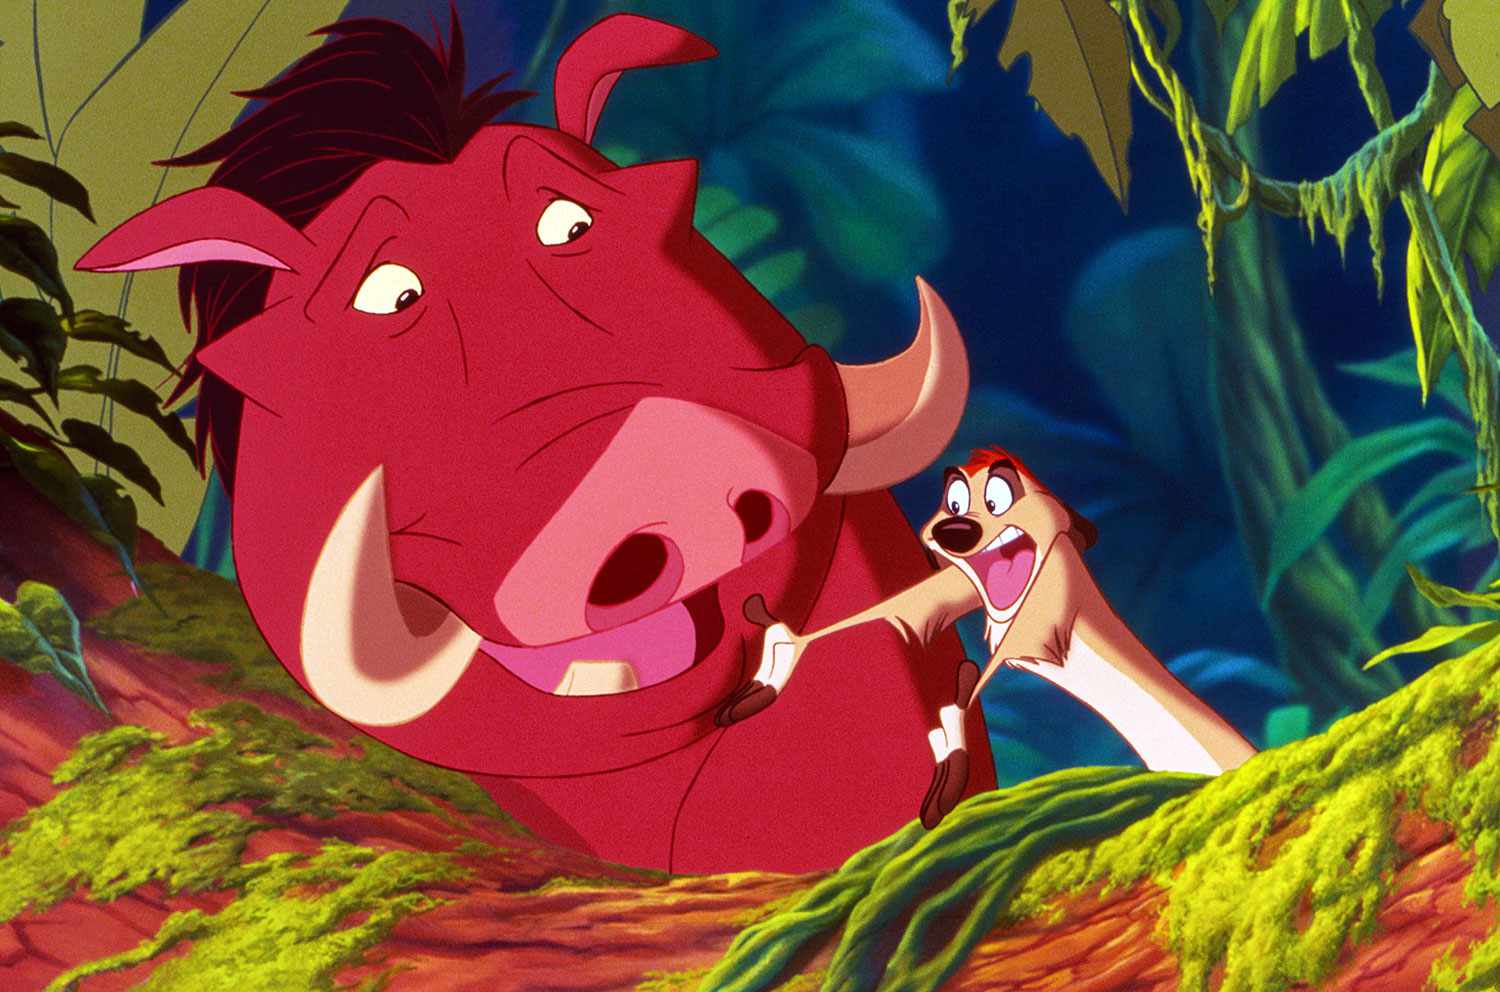 Nathan Lane says Elton John didn't want Timon and Pumbaa singing all of this classic 'Lion King' song